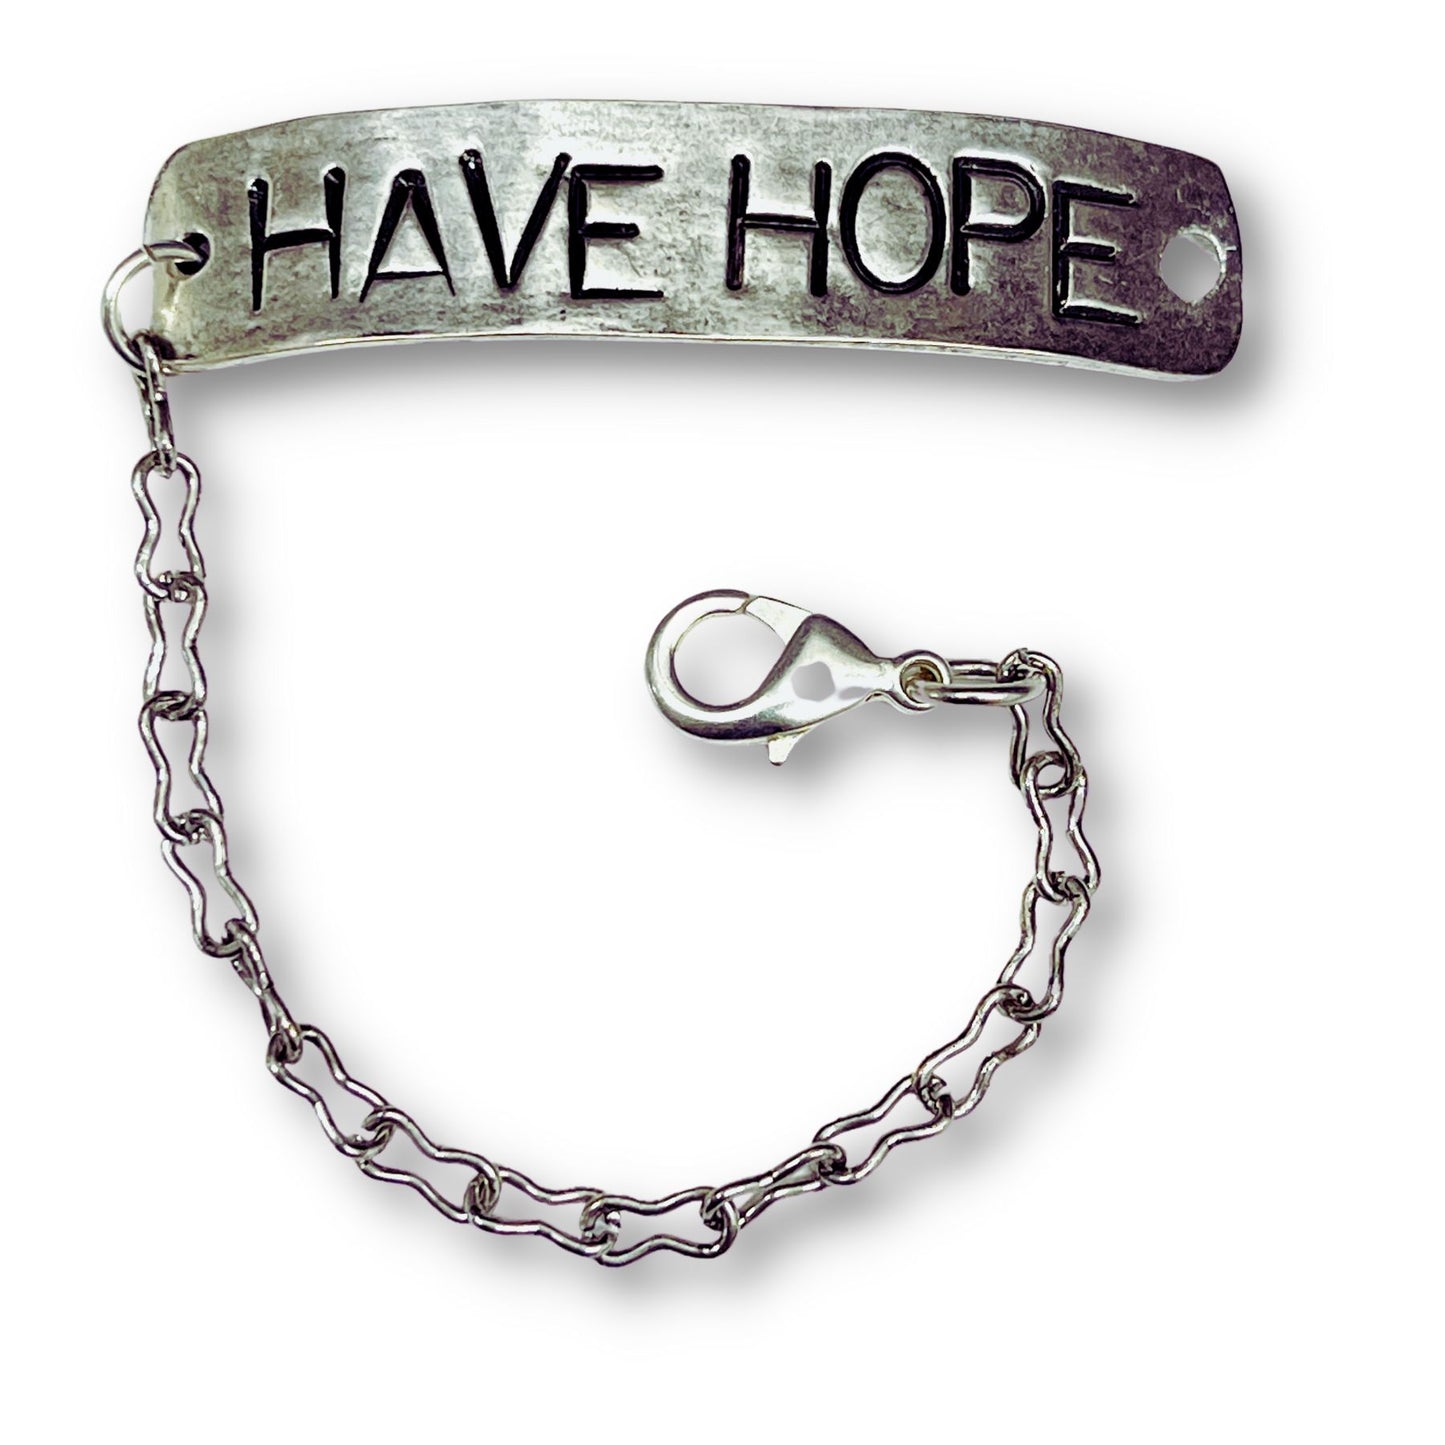 Have Hope Chain ID Bracelet